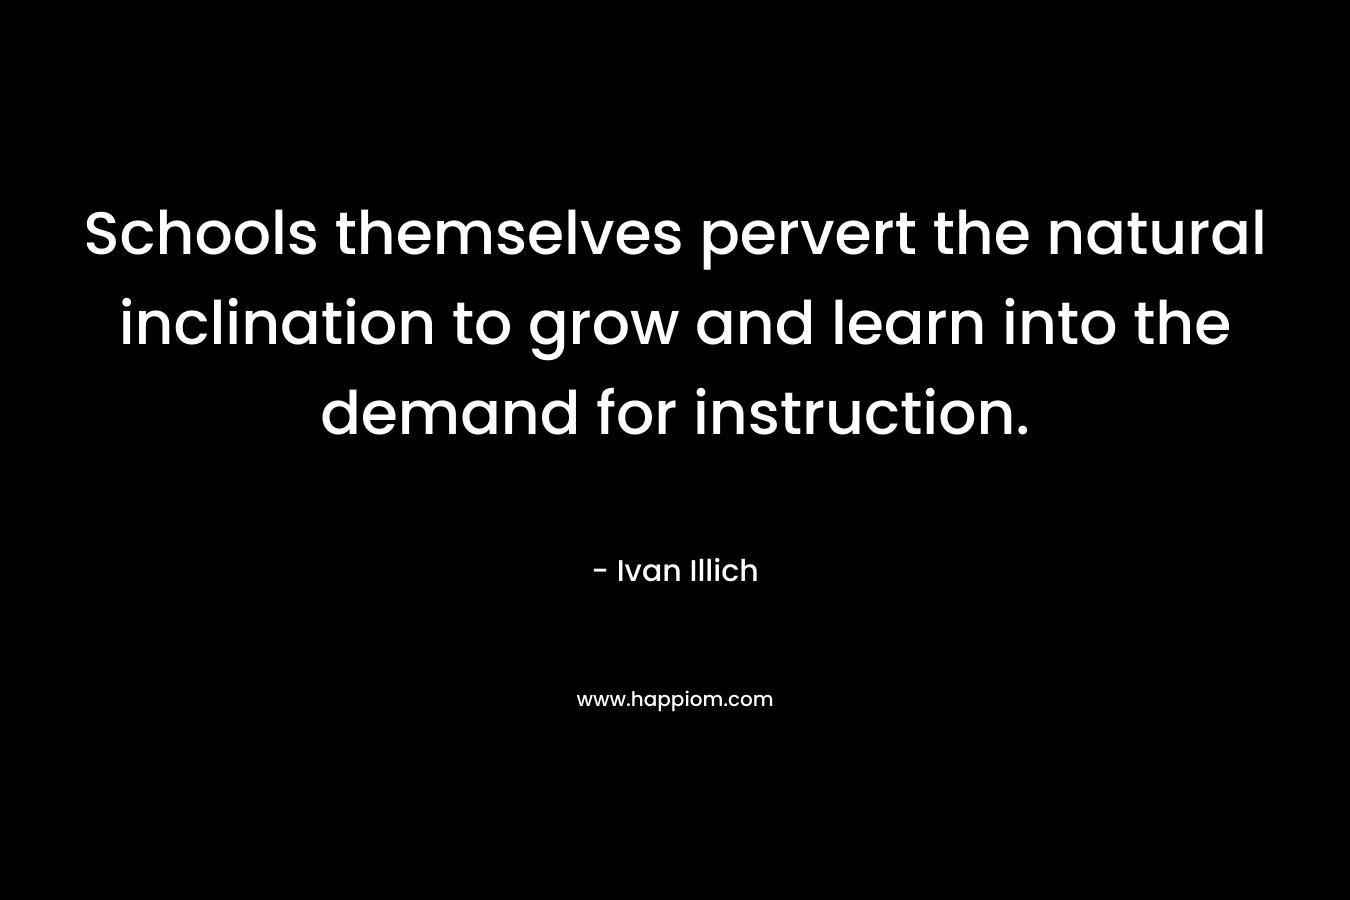 Schools themselves pervert the natural inclination to grow and learn into the demand for instruction.